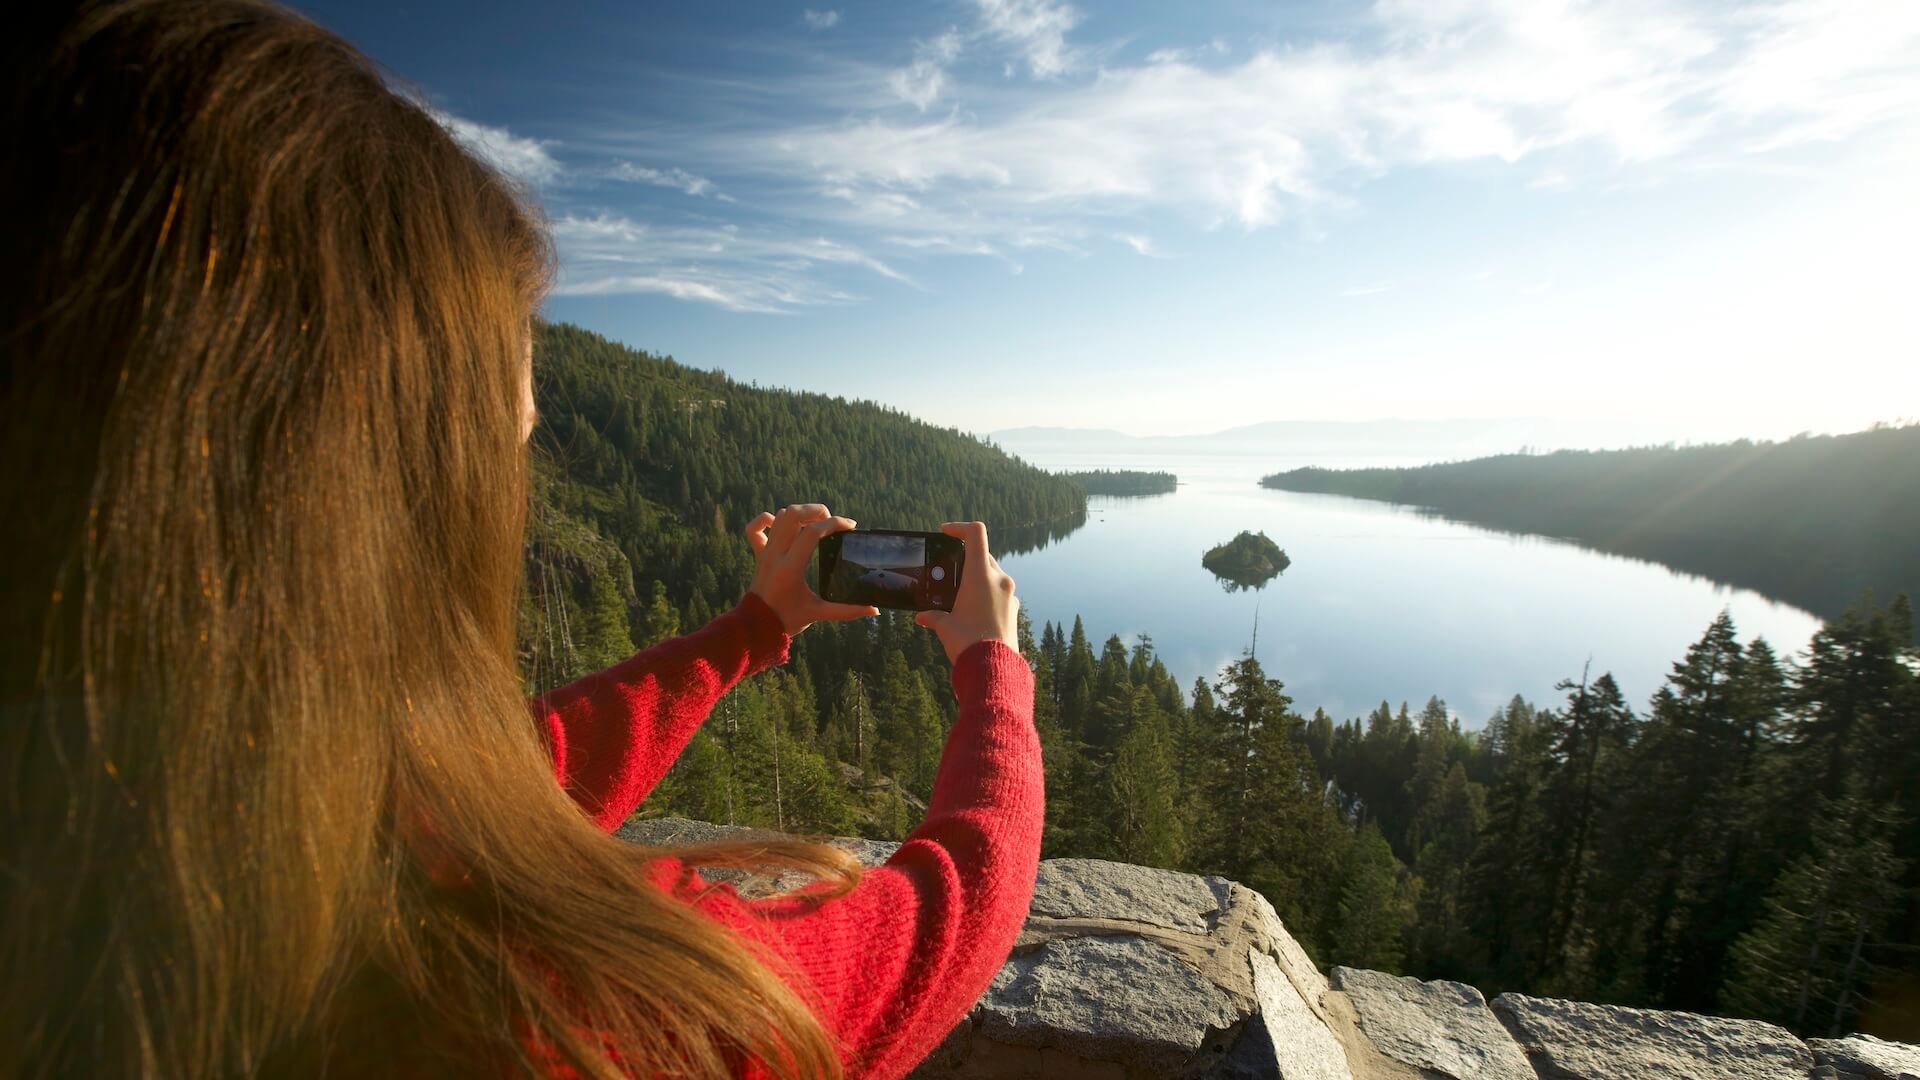 Taking photos of scenic Emerald Bay State Park and Fannette Island